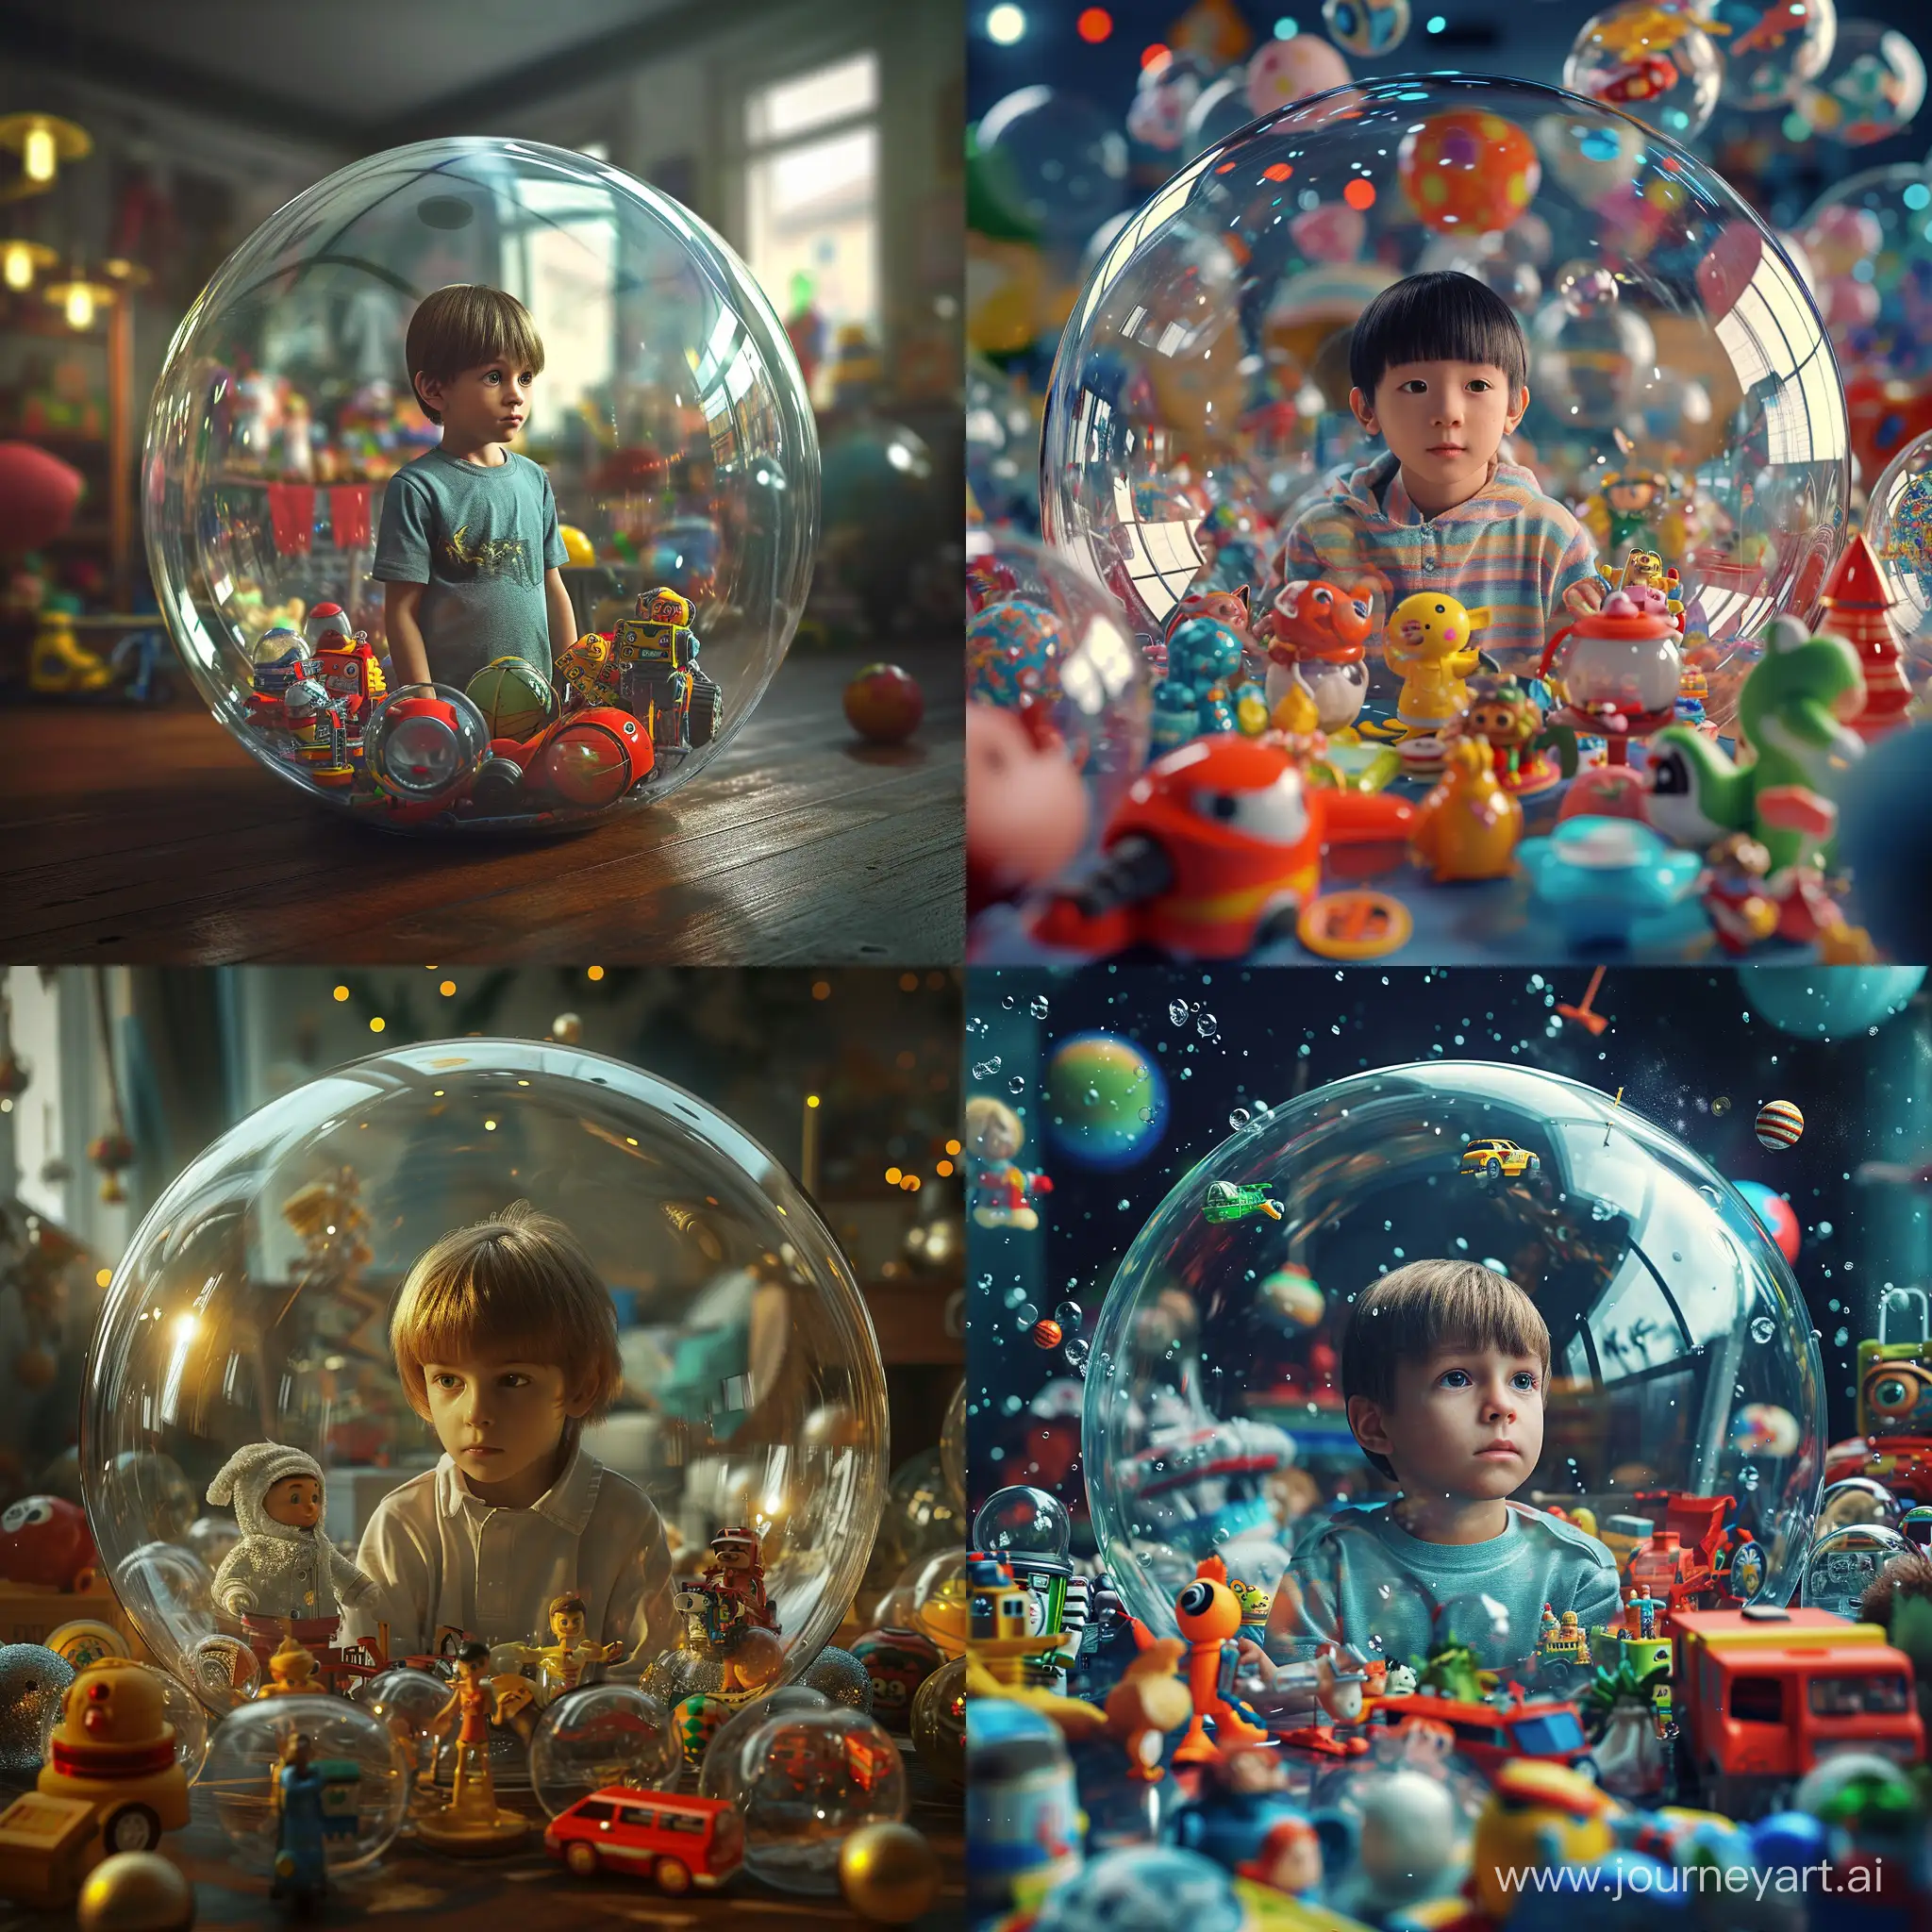 Inside the glass sphere is a five-year-old boy surrounded by expensive children's toys, realistic, cinematic, in 4k format"